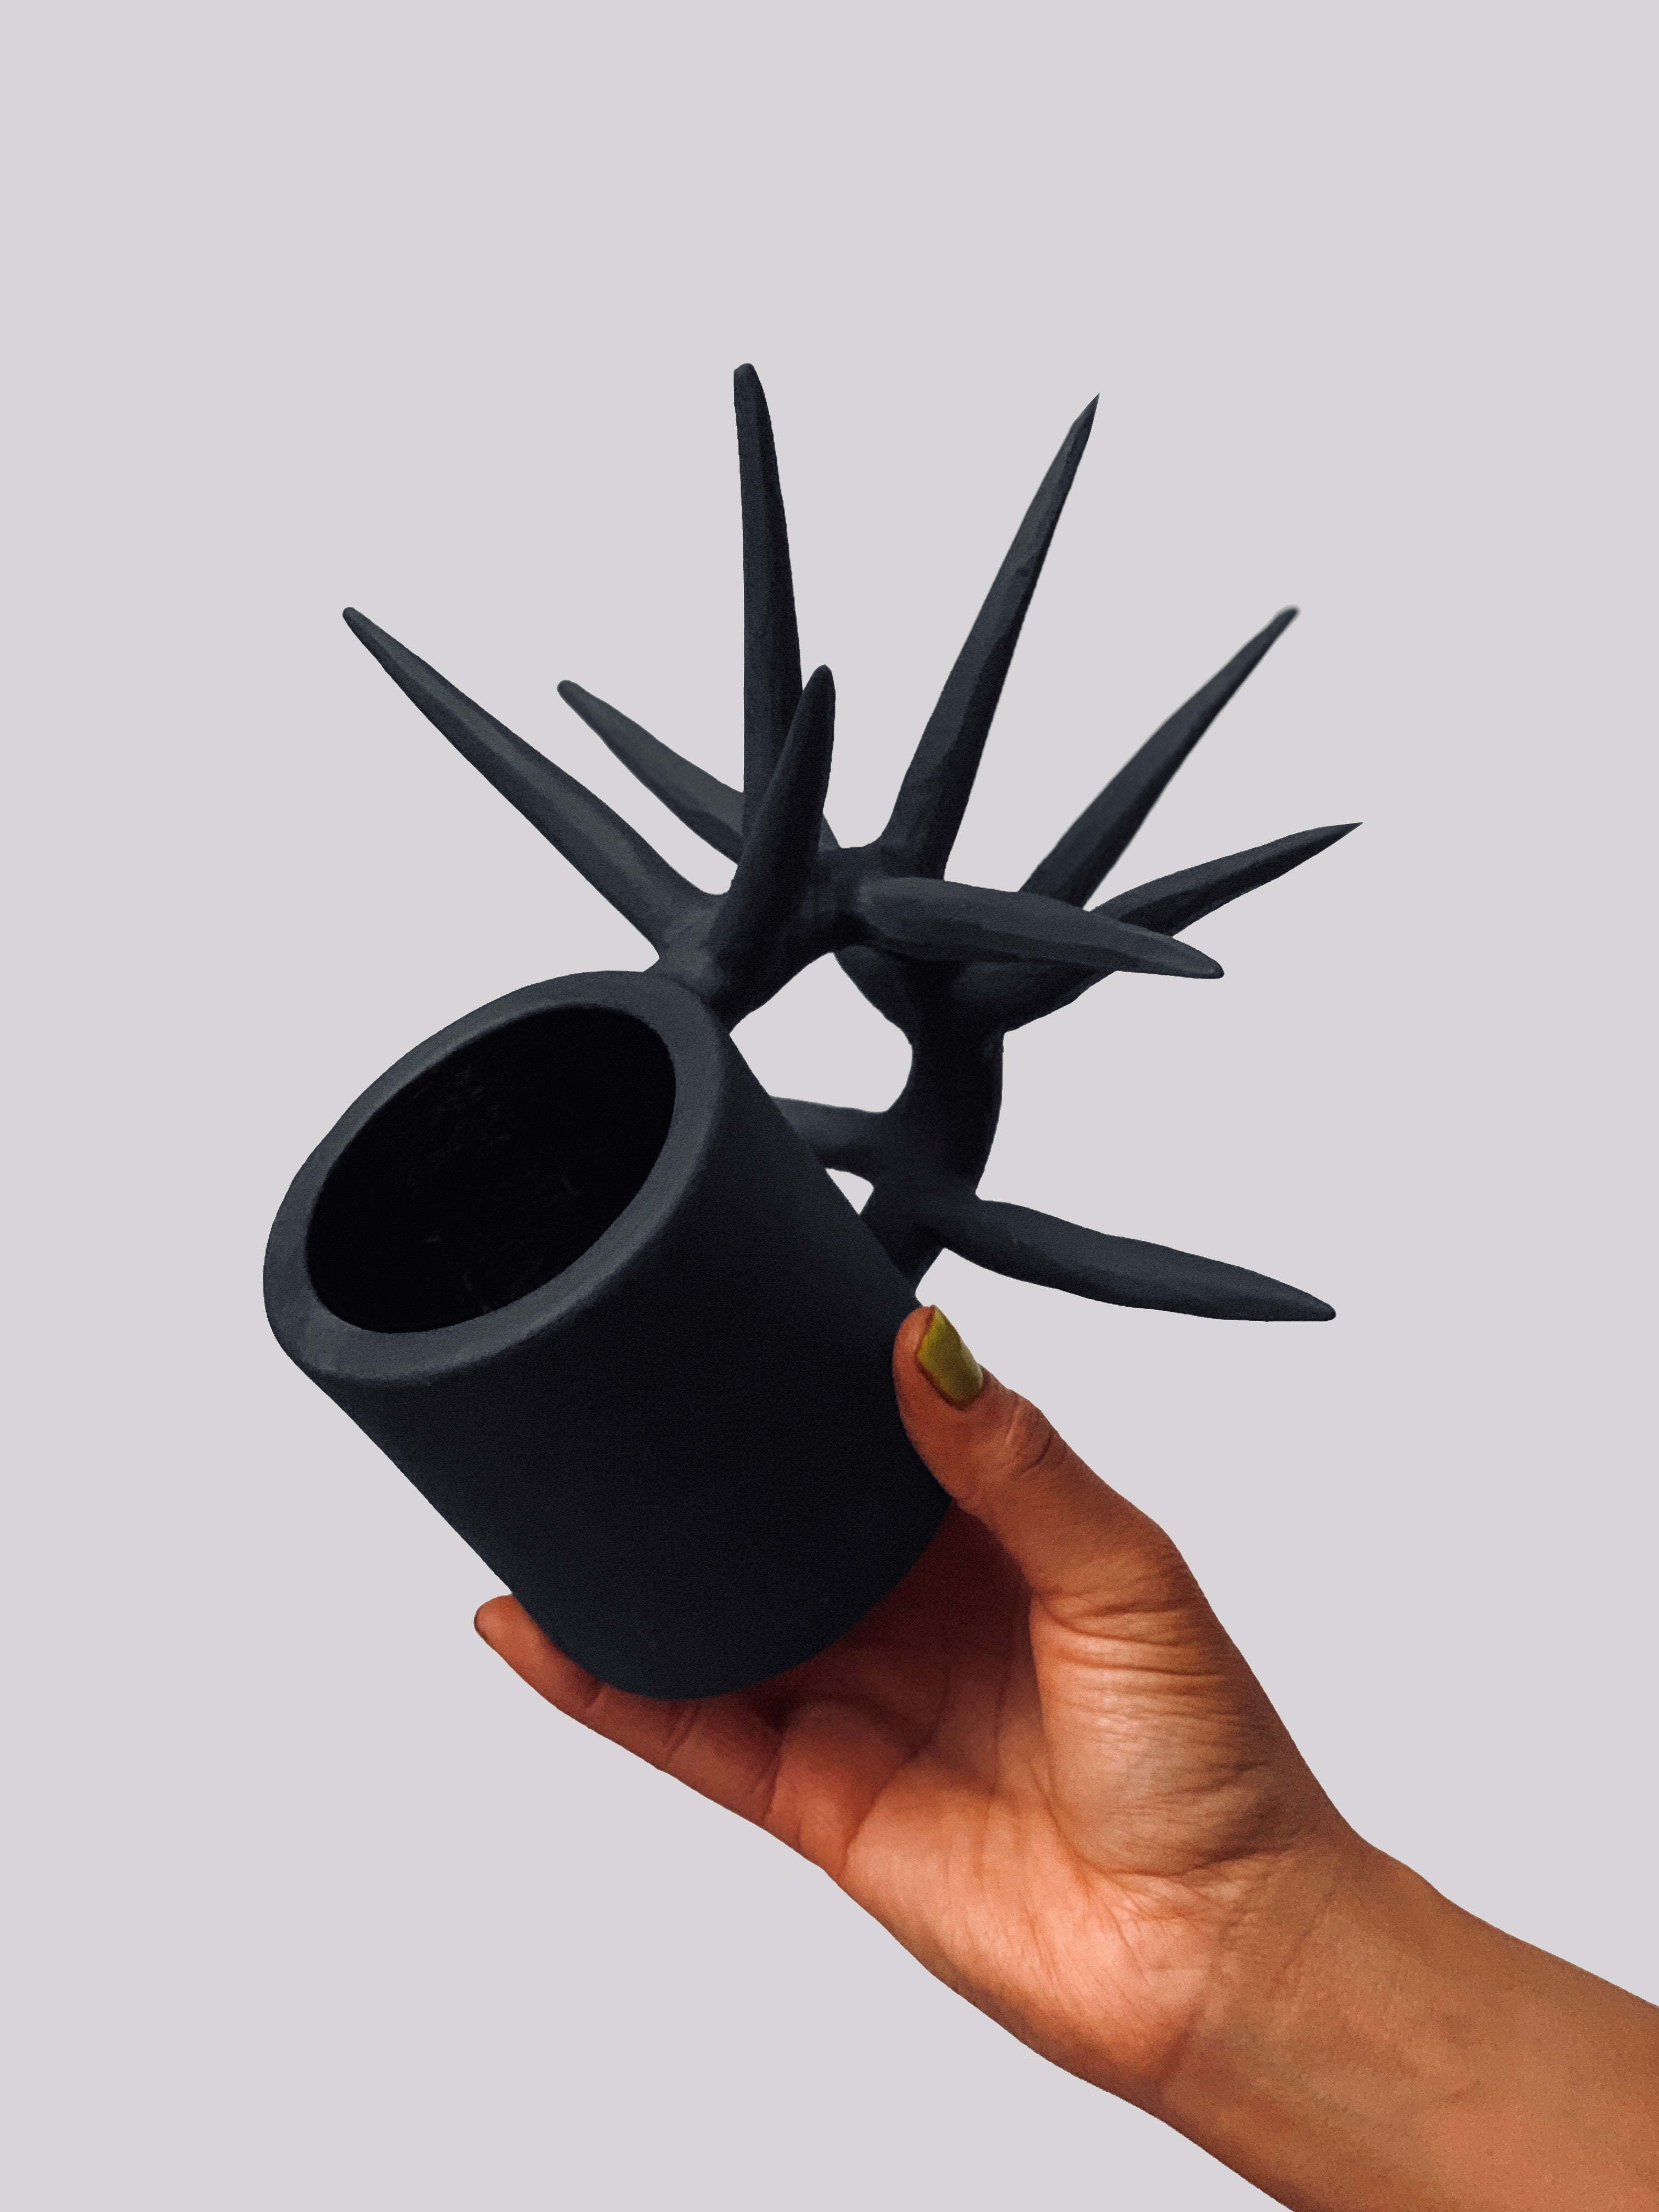 Black matte stoneware ceramic mug with long spikes extending from a circular side handle.